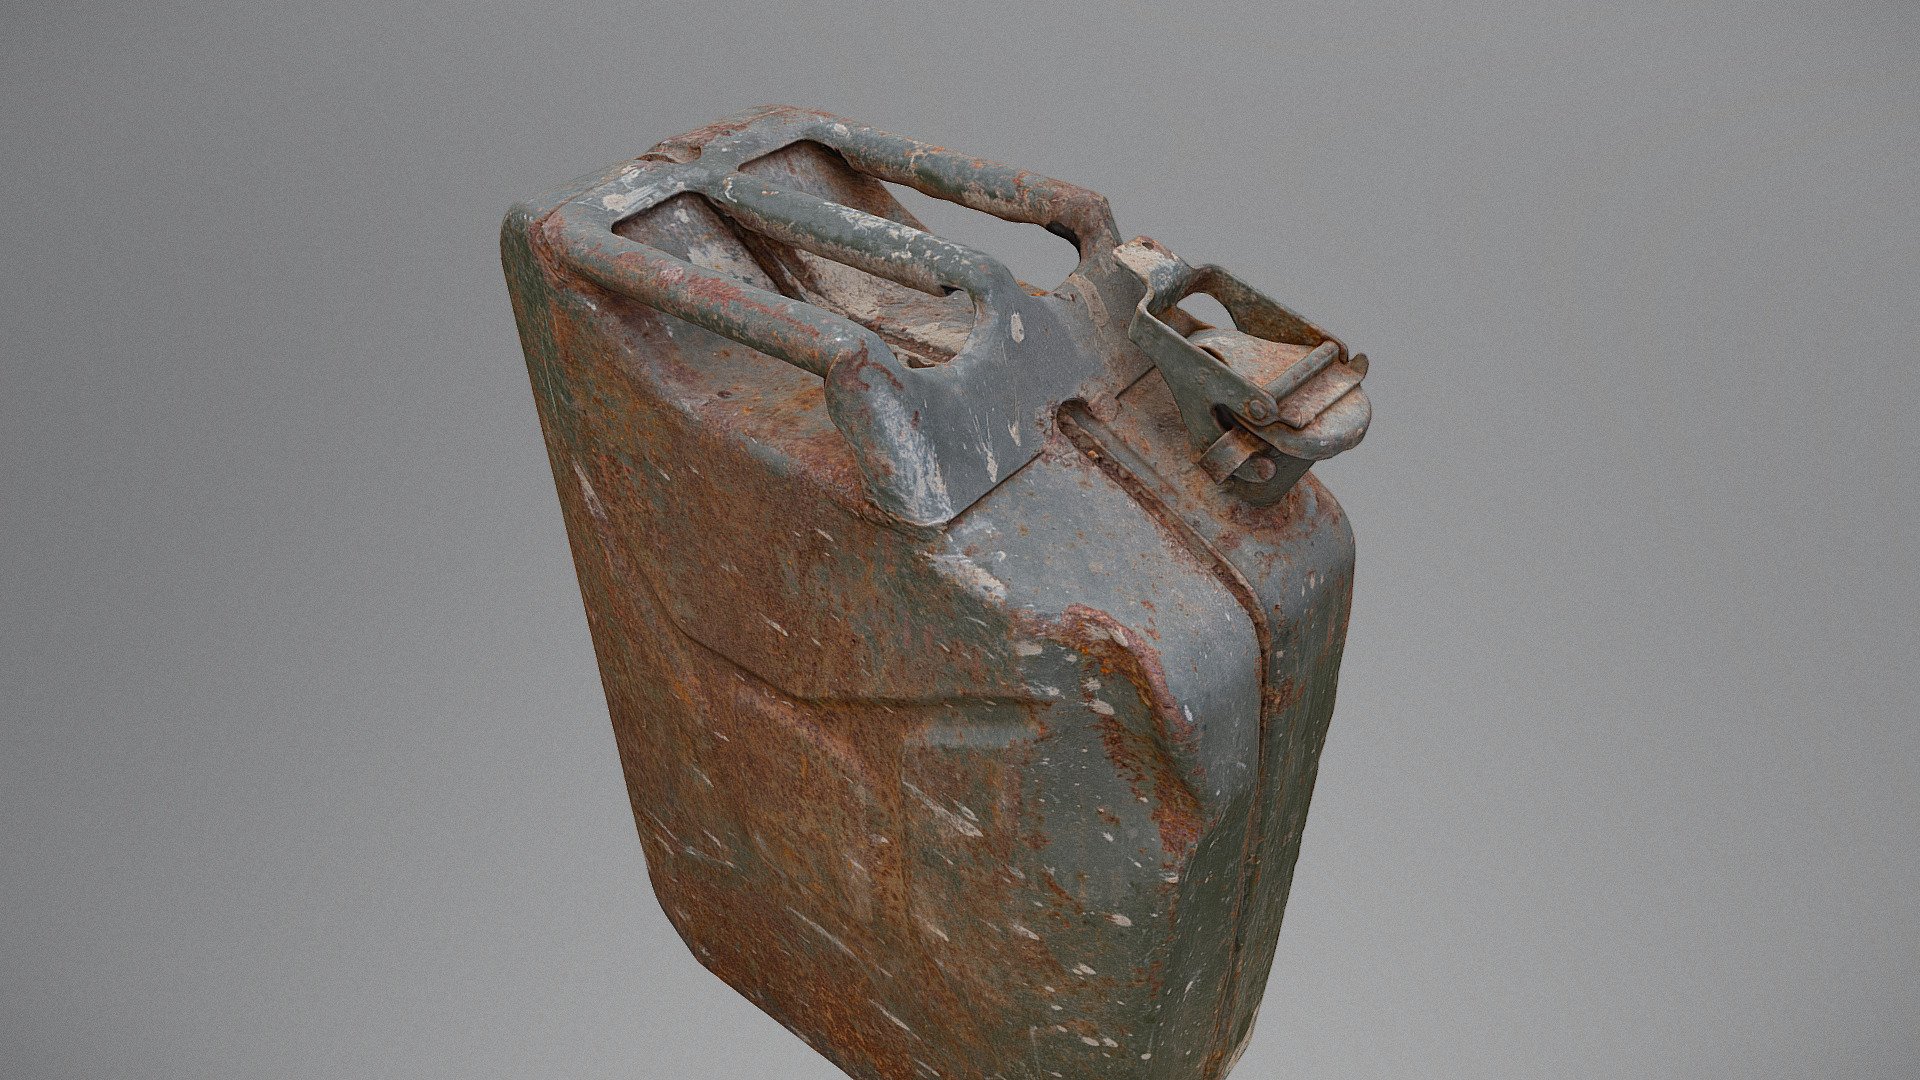 Rusty metal tin Petrol fuel can canister container for diesel gas gasoline oil grungy vintage old rust, 20 liters

Created in RealityCapture by Capturing Reality

photogrammetry scan (170x24mp), 2x8k textures - Rusty Petrol can - Download Free 3D model by matousekfoto 3d model